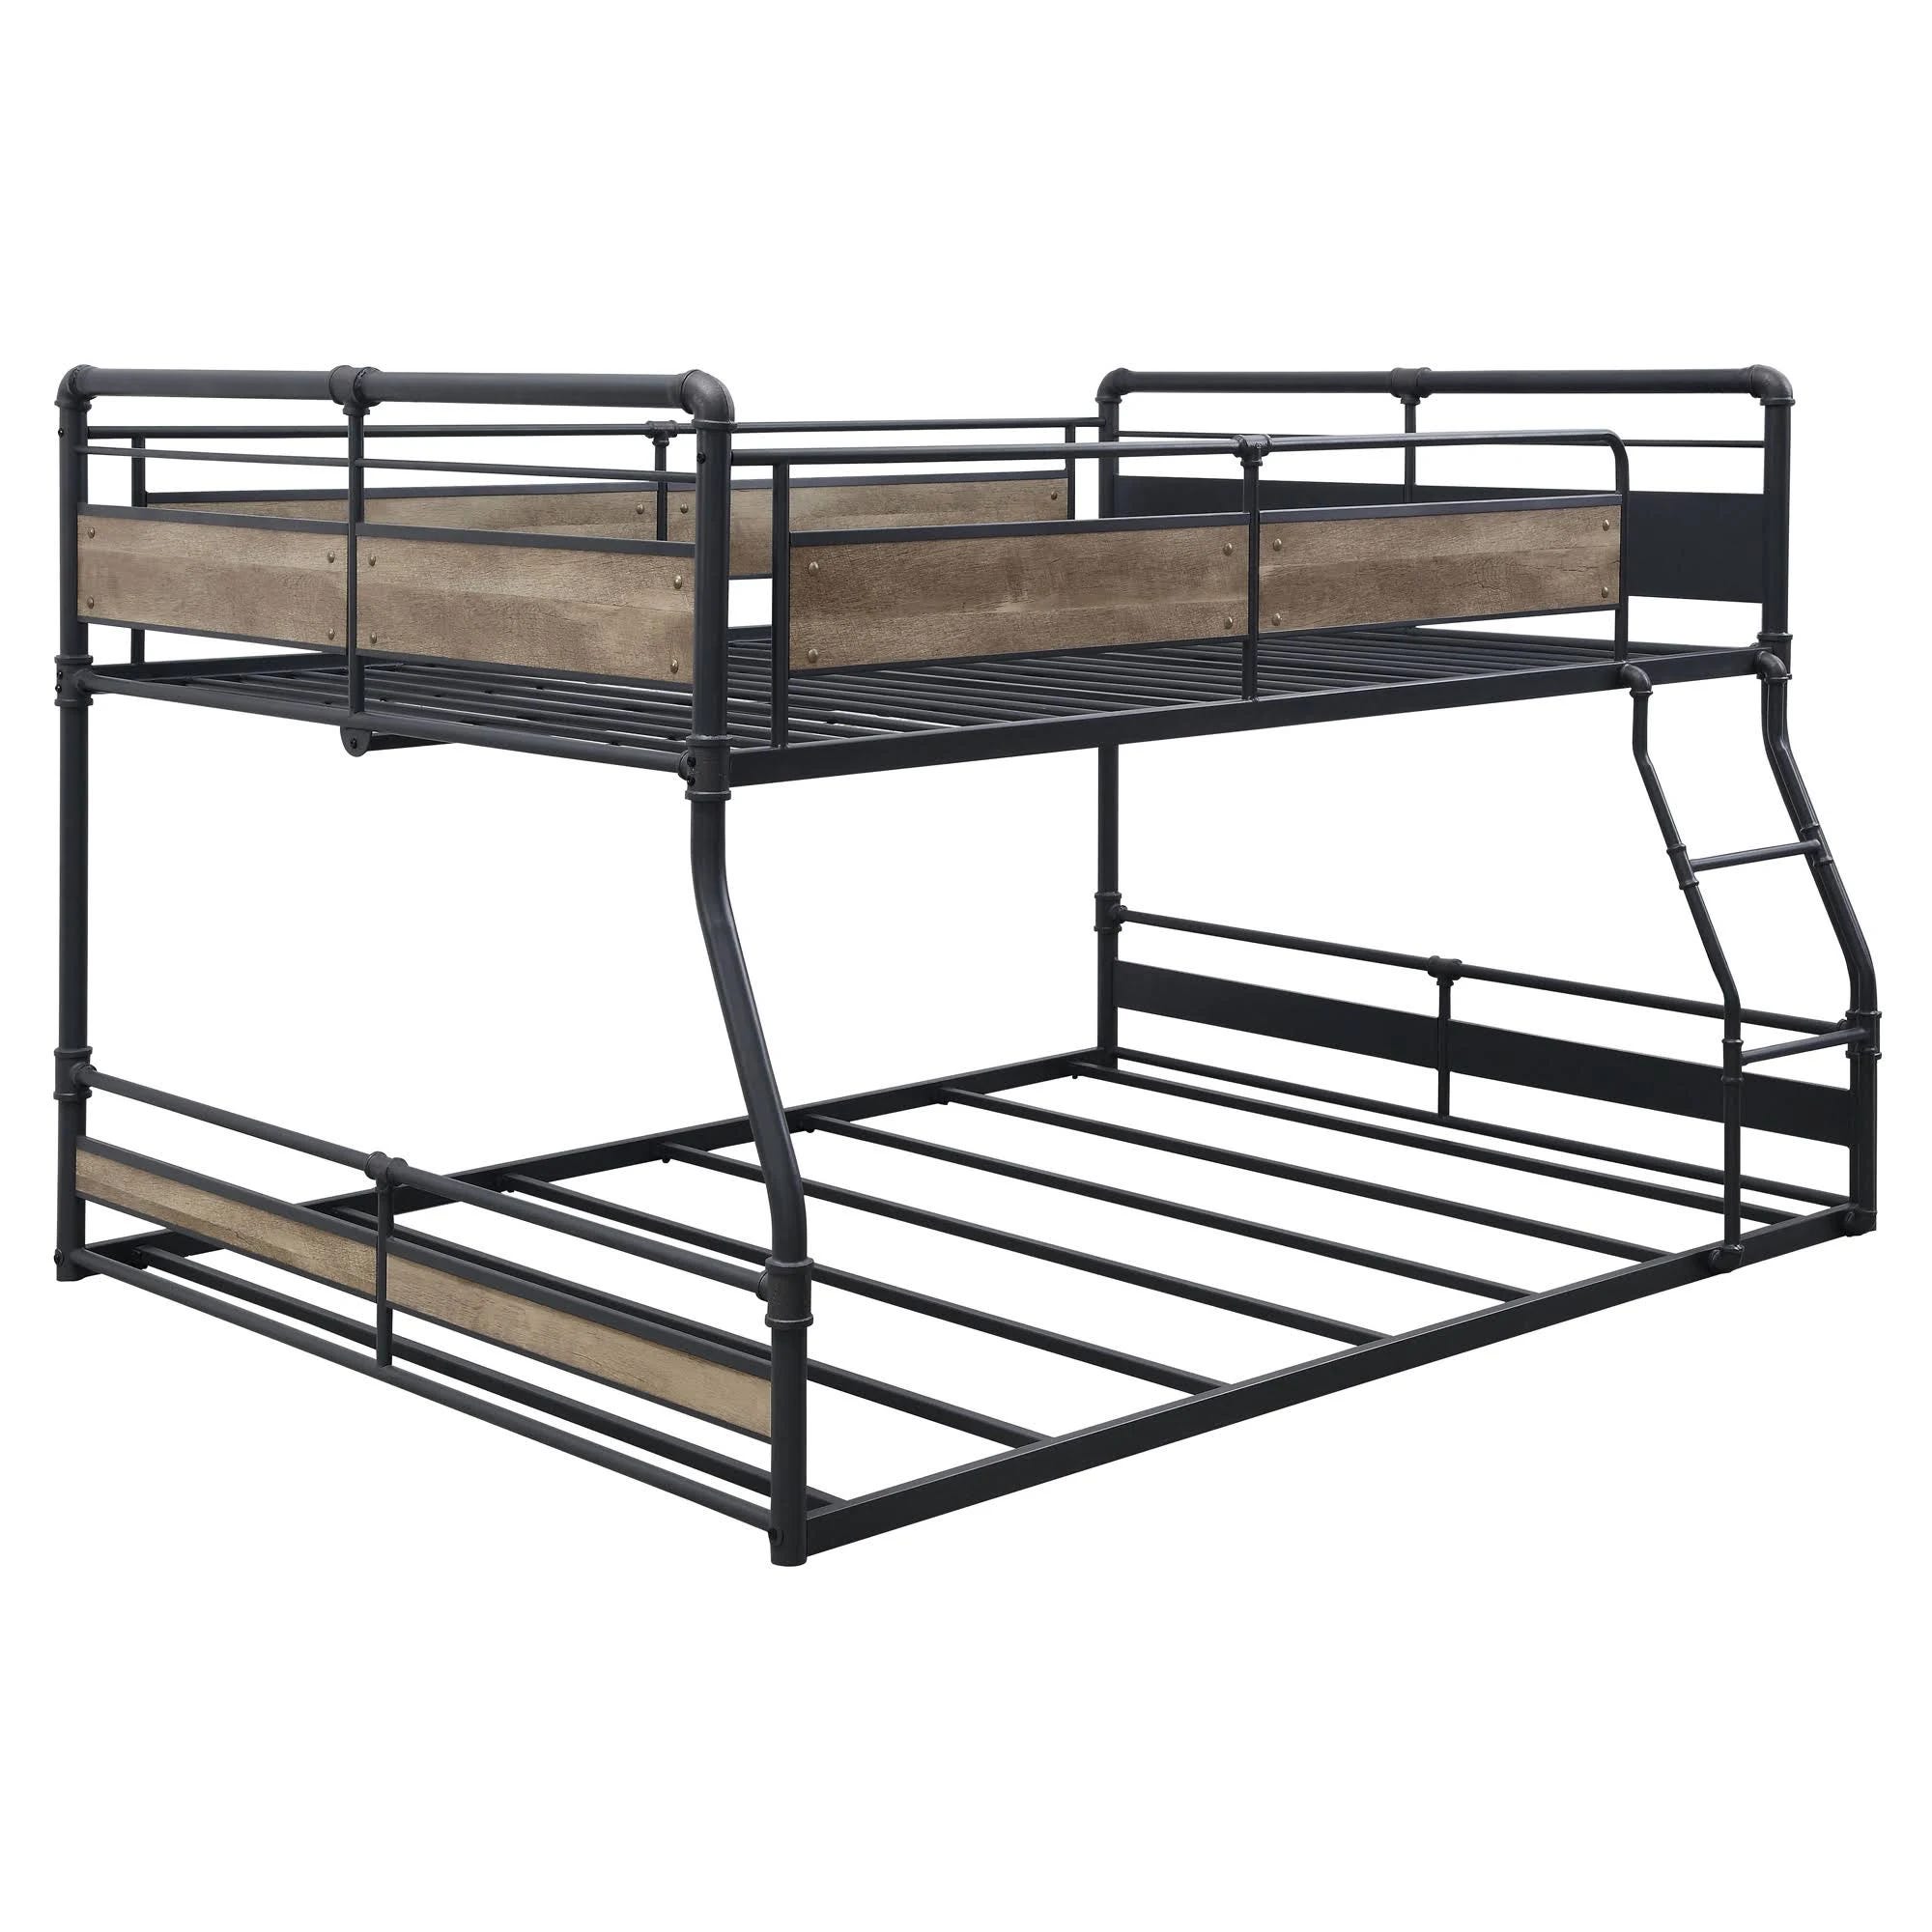 Acme Cordelia Full/Queen Bunk Bed: Distressed Finish Bunk Beds for Guest Rooms and Teens | Image